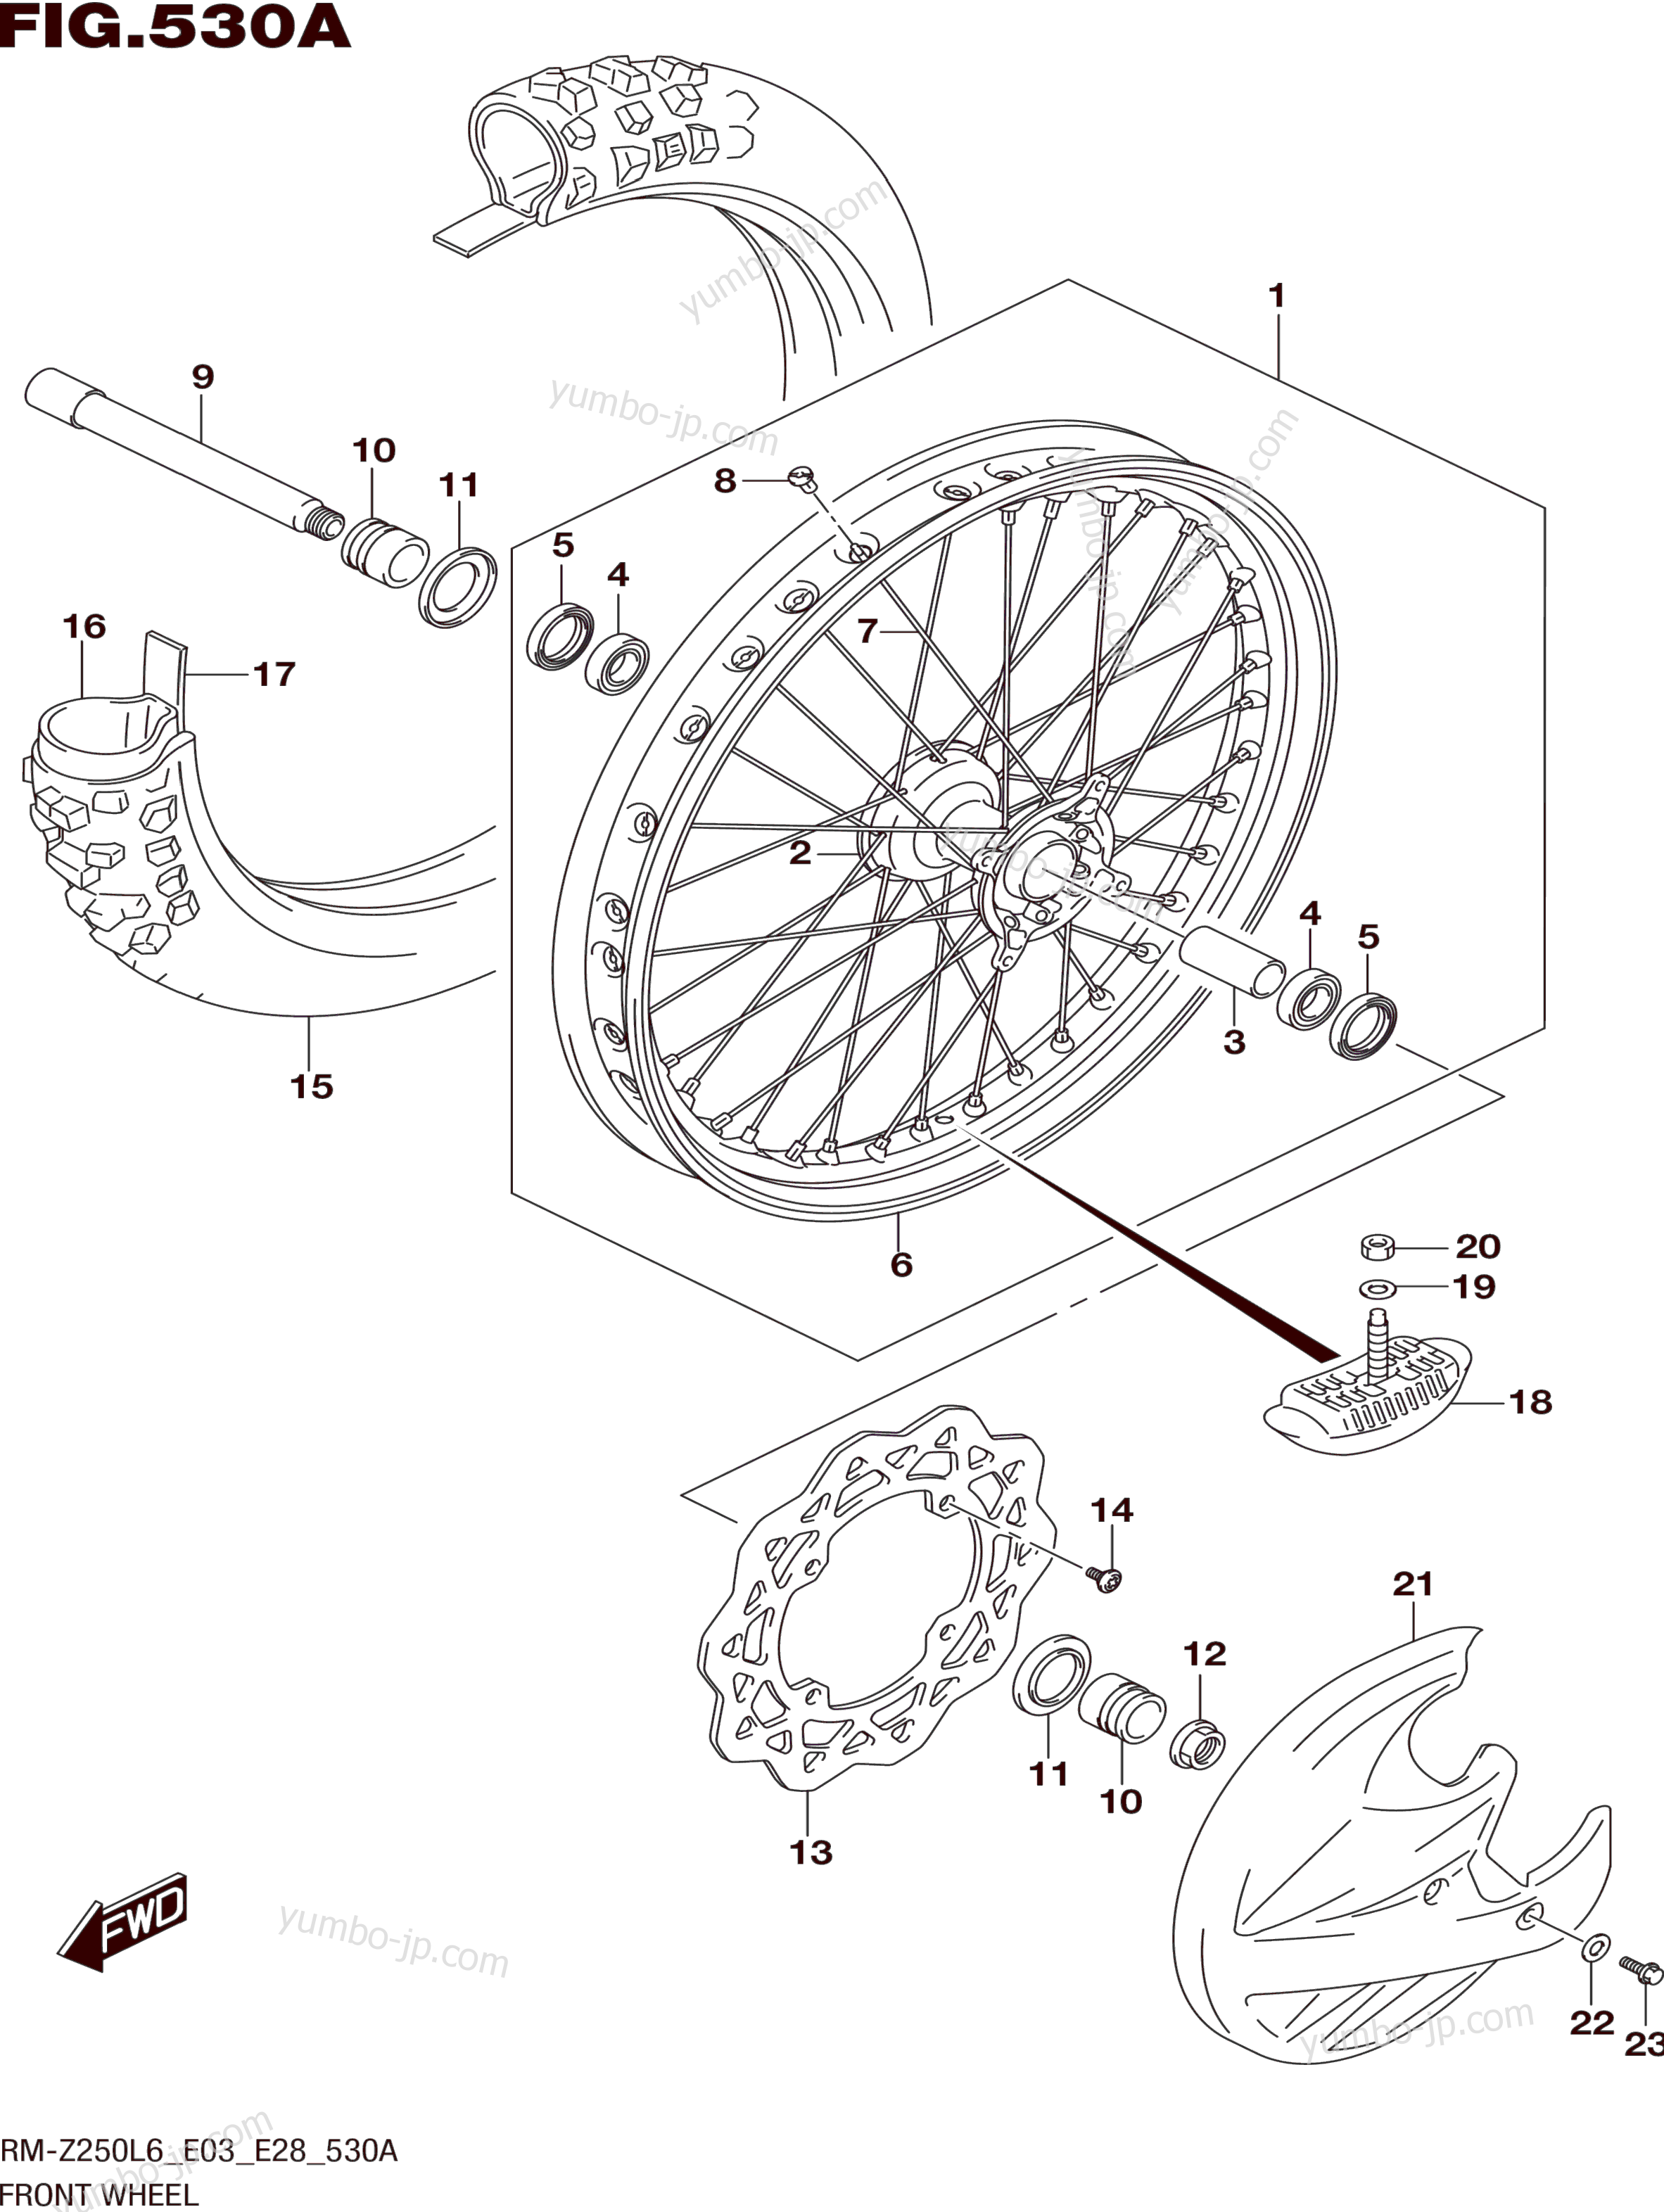 FRONT WHEEL for motorcycles SUZUKI RM-Z250 2016 year